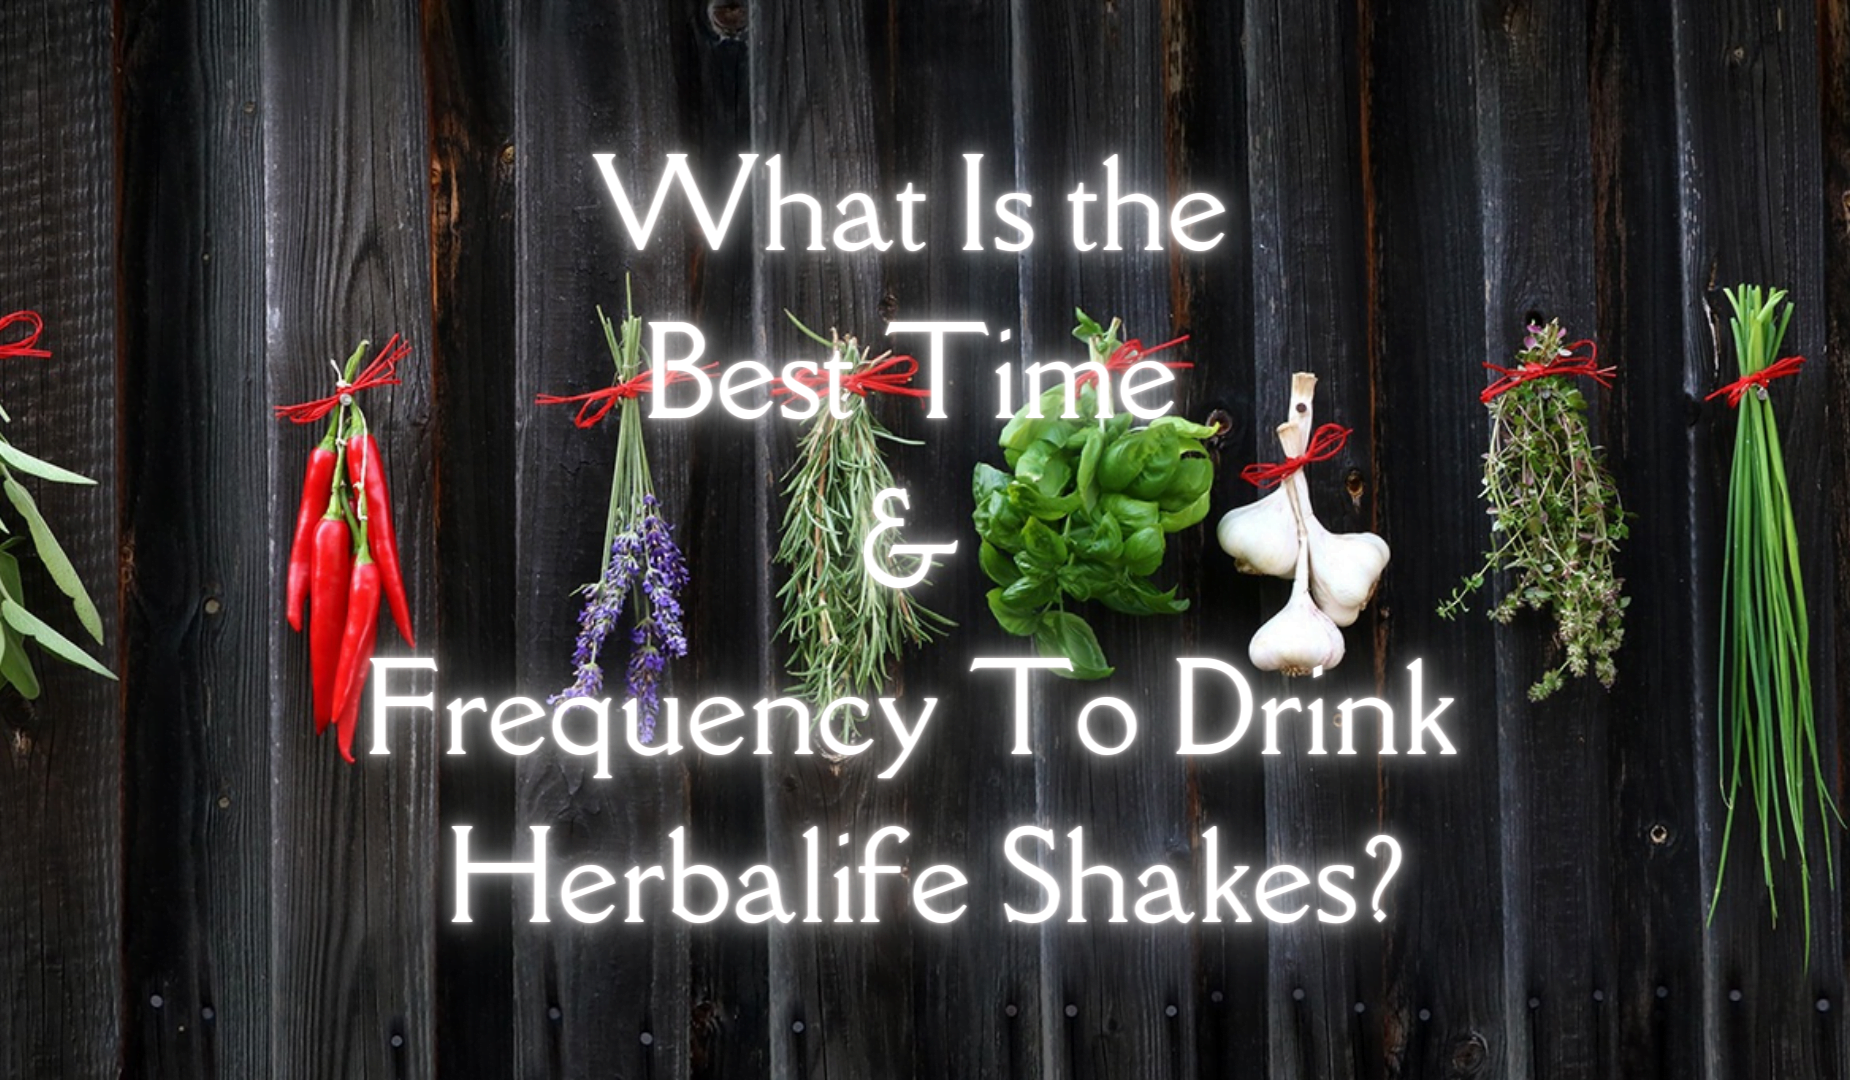 What Is the Best Time and Frequency To Drink Herbalife Shakes?